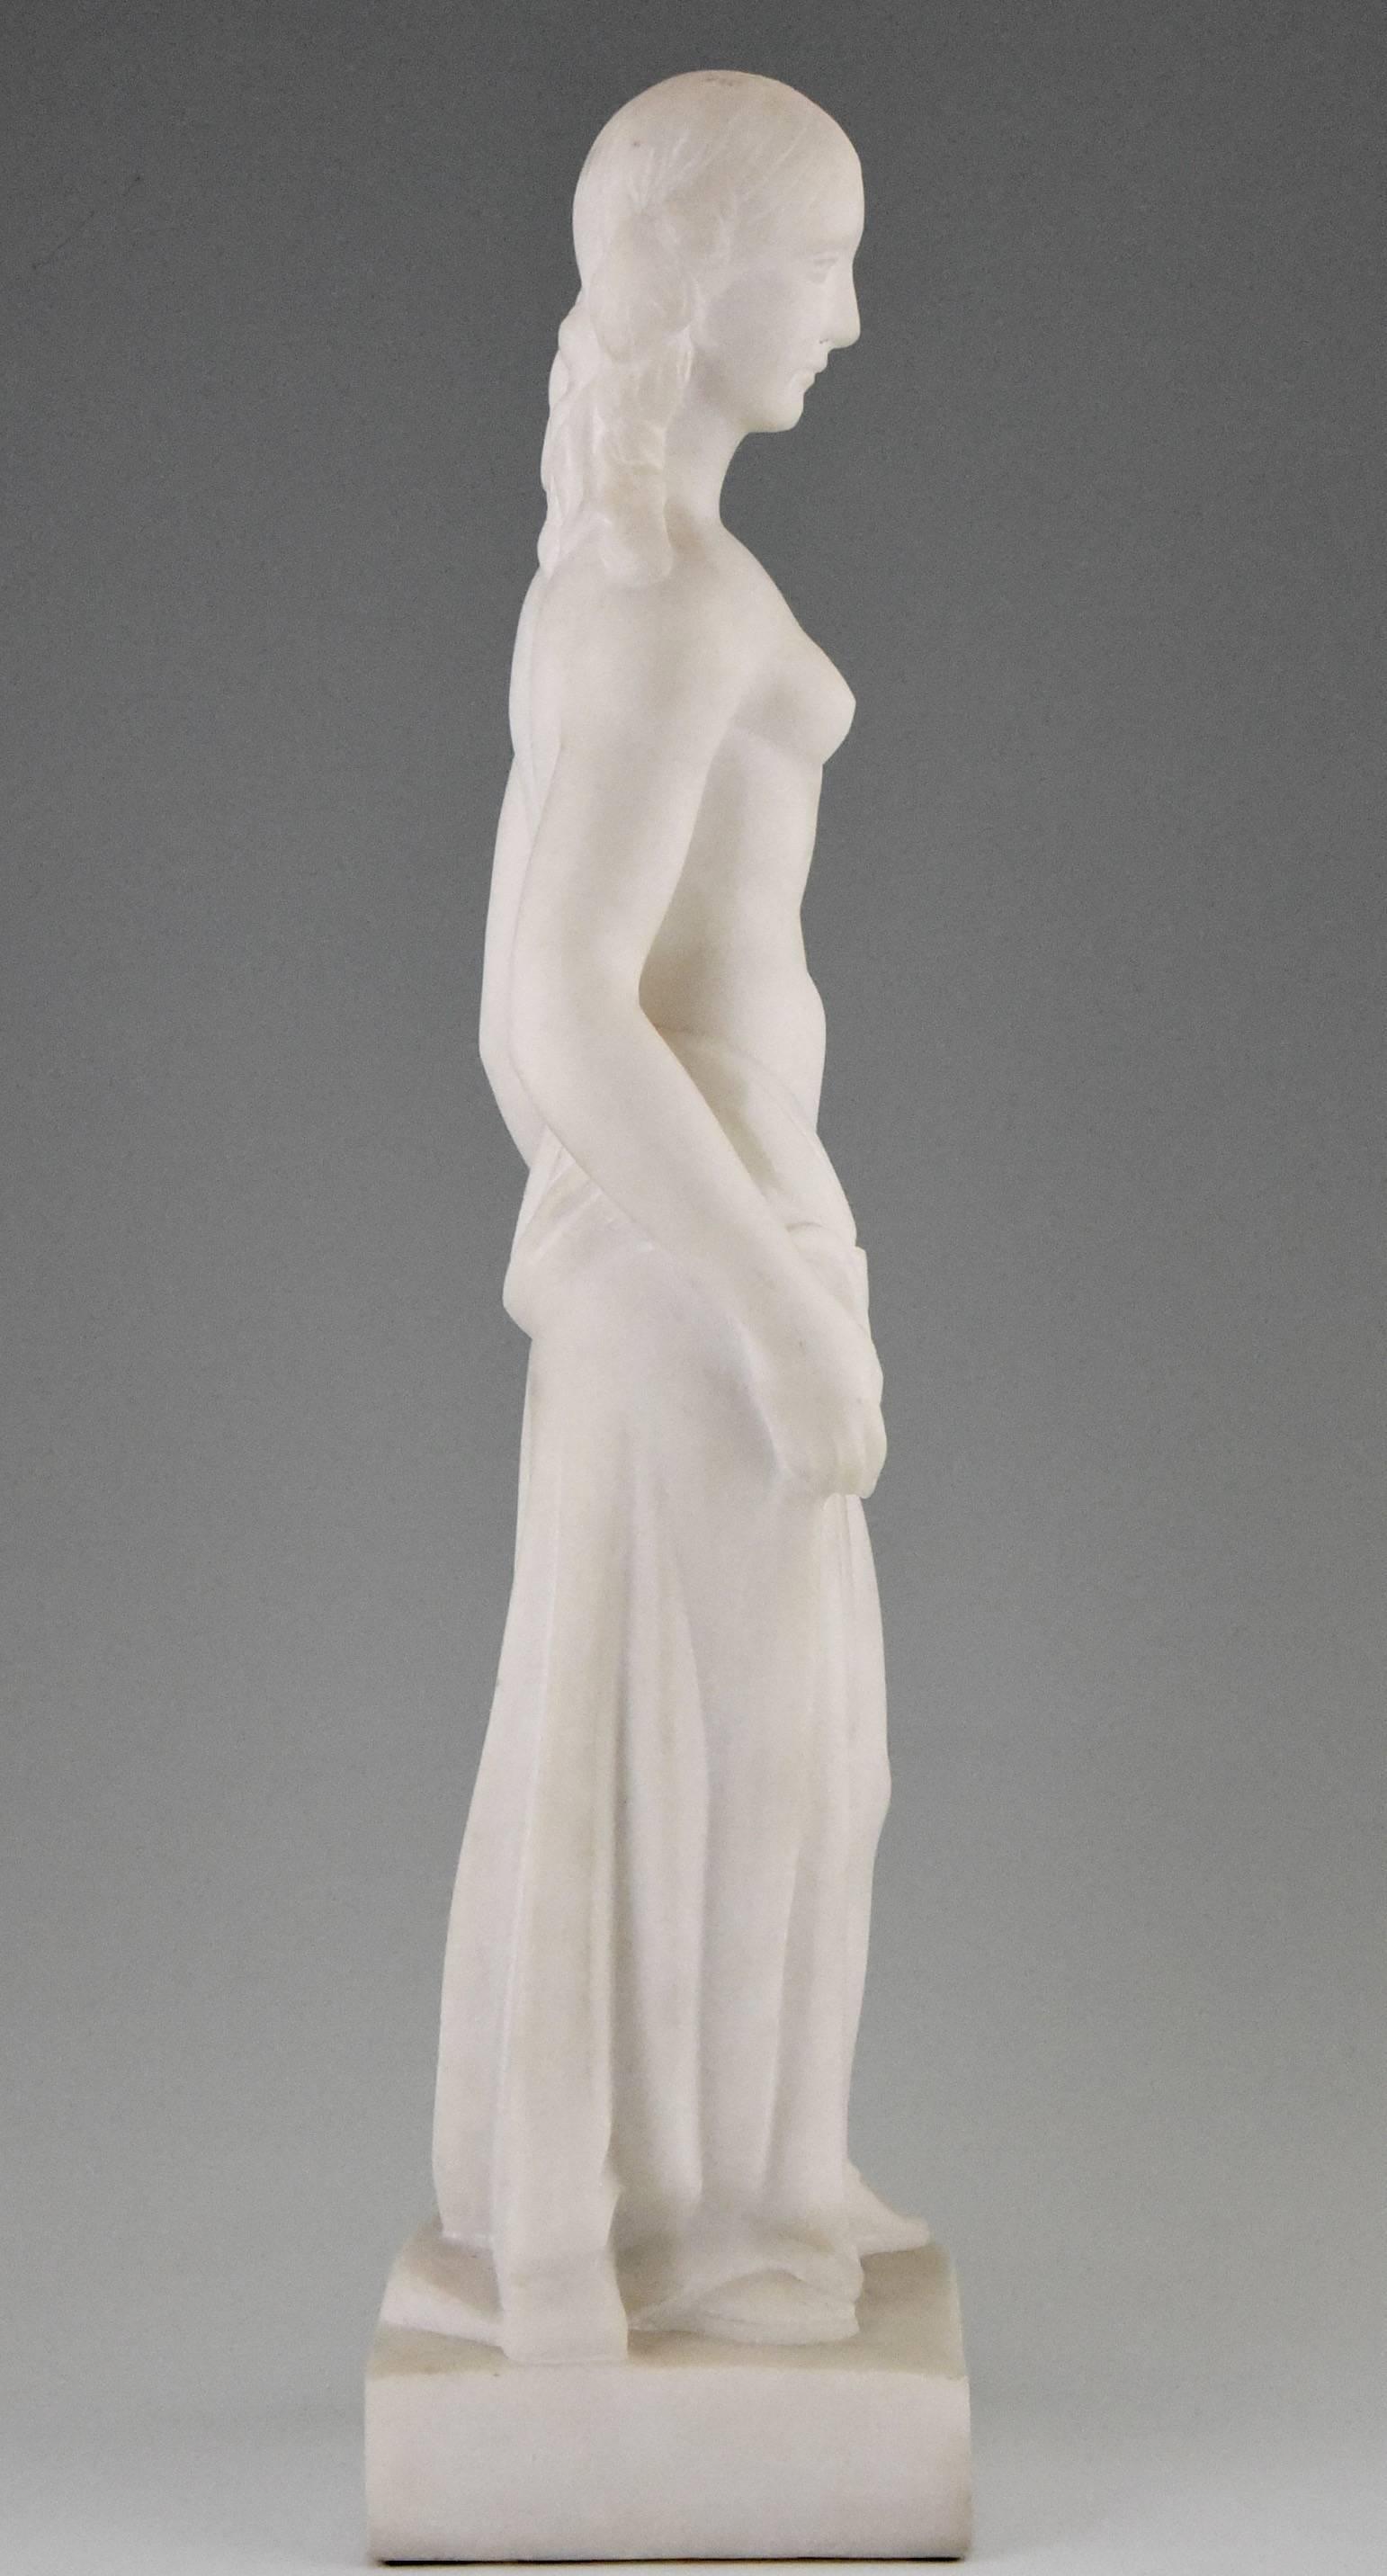 Carved Art Deco White Marble Sculpture of a Nude by Jules Bernaerts, 1935